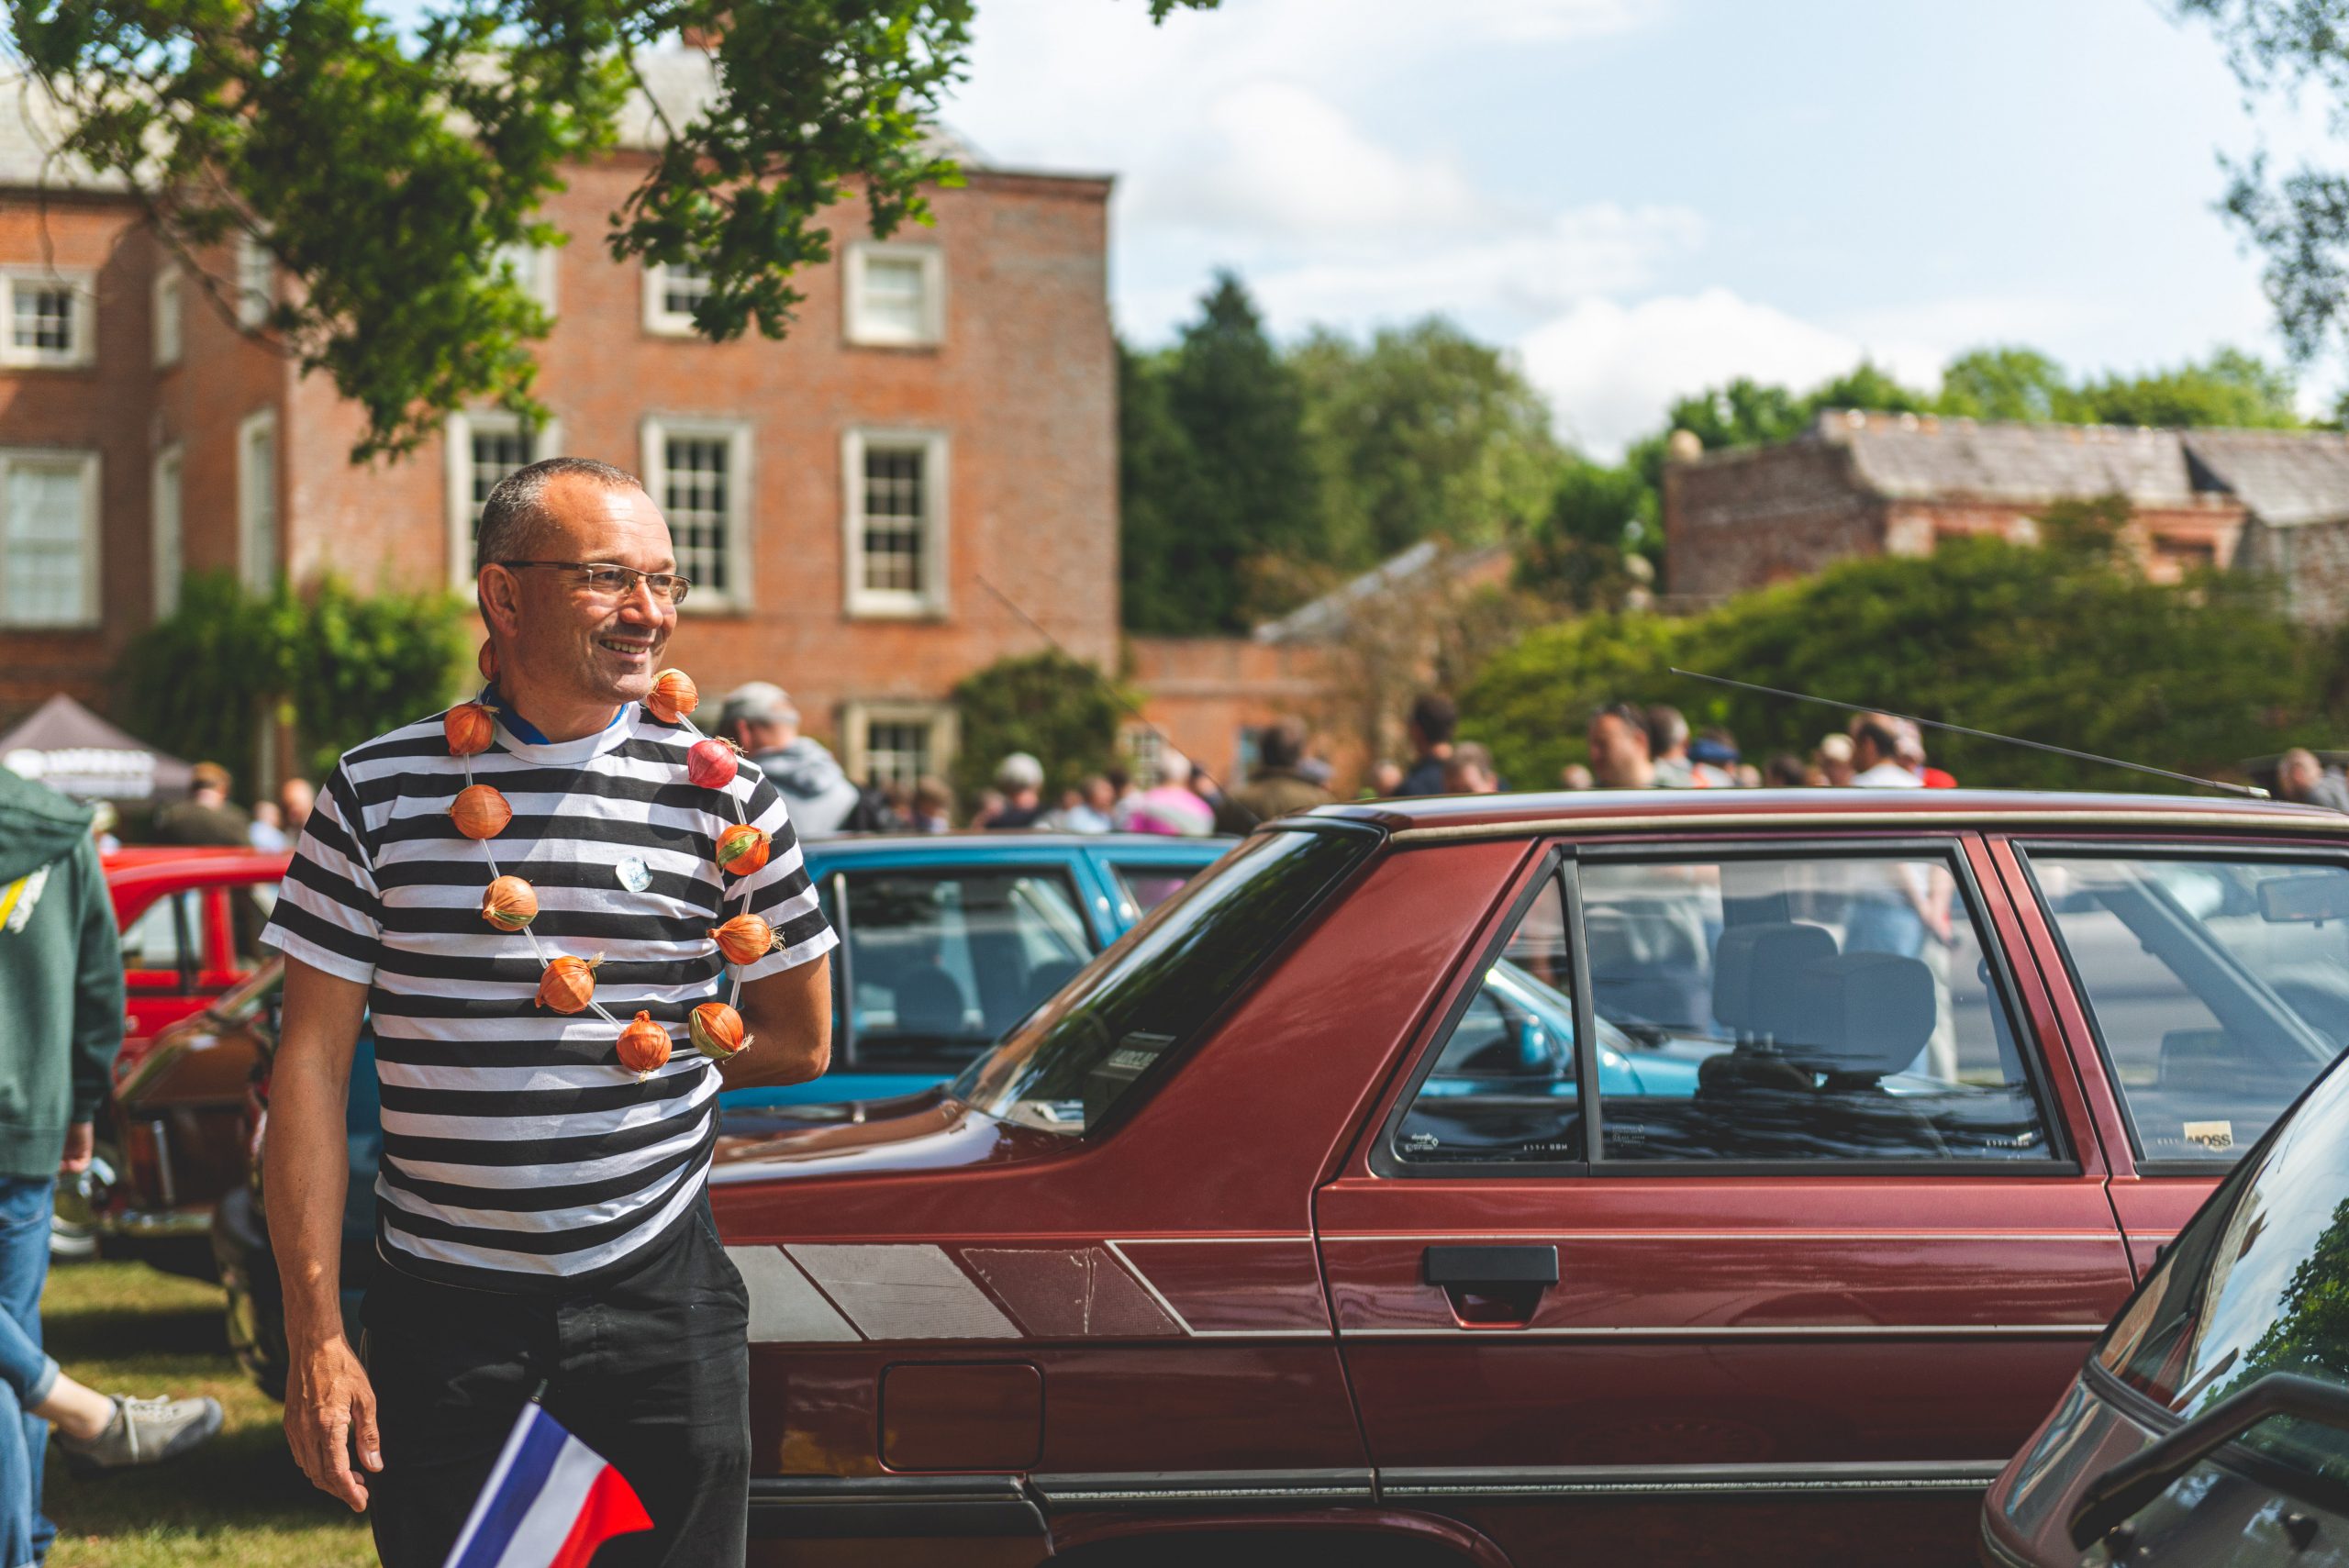 Hurrah for the humdrum: the highlights of the Festival of the Unexceptional (2014 to 2019)